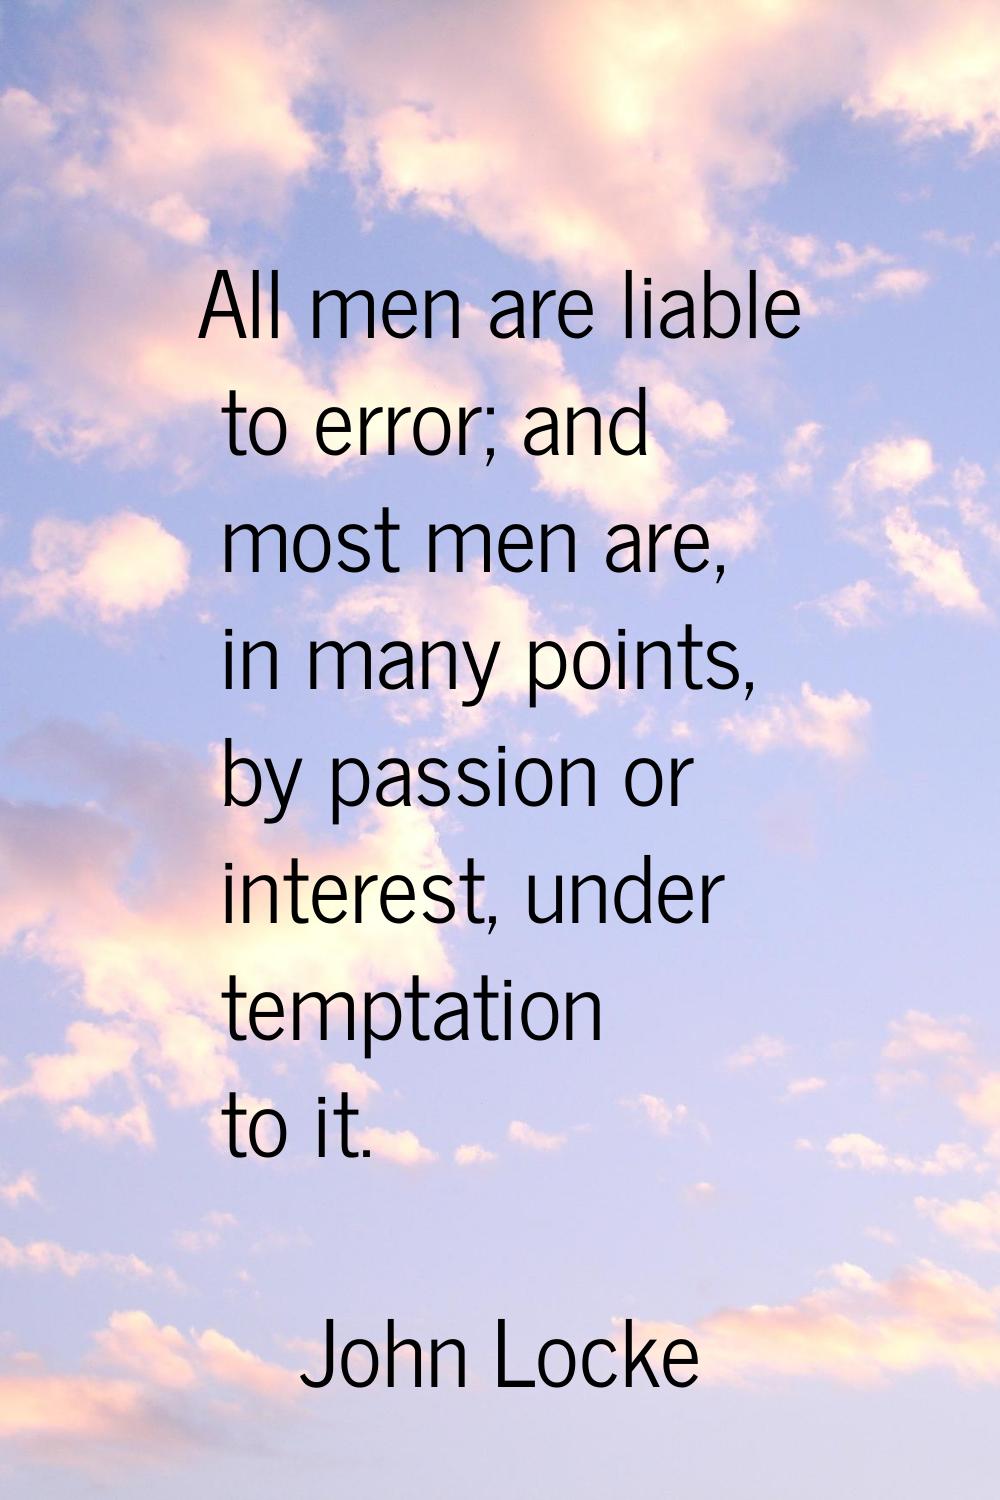 All men are liable to error; and most men are, in many points, by passion or interest, under tempta